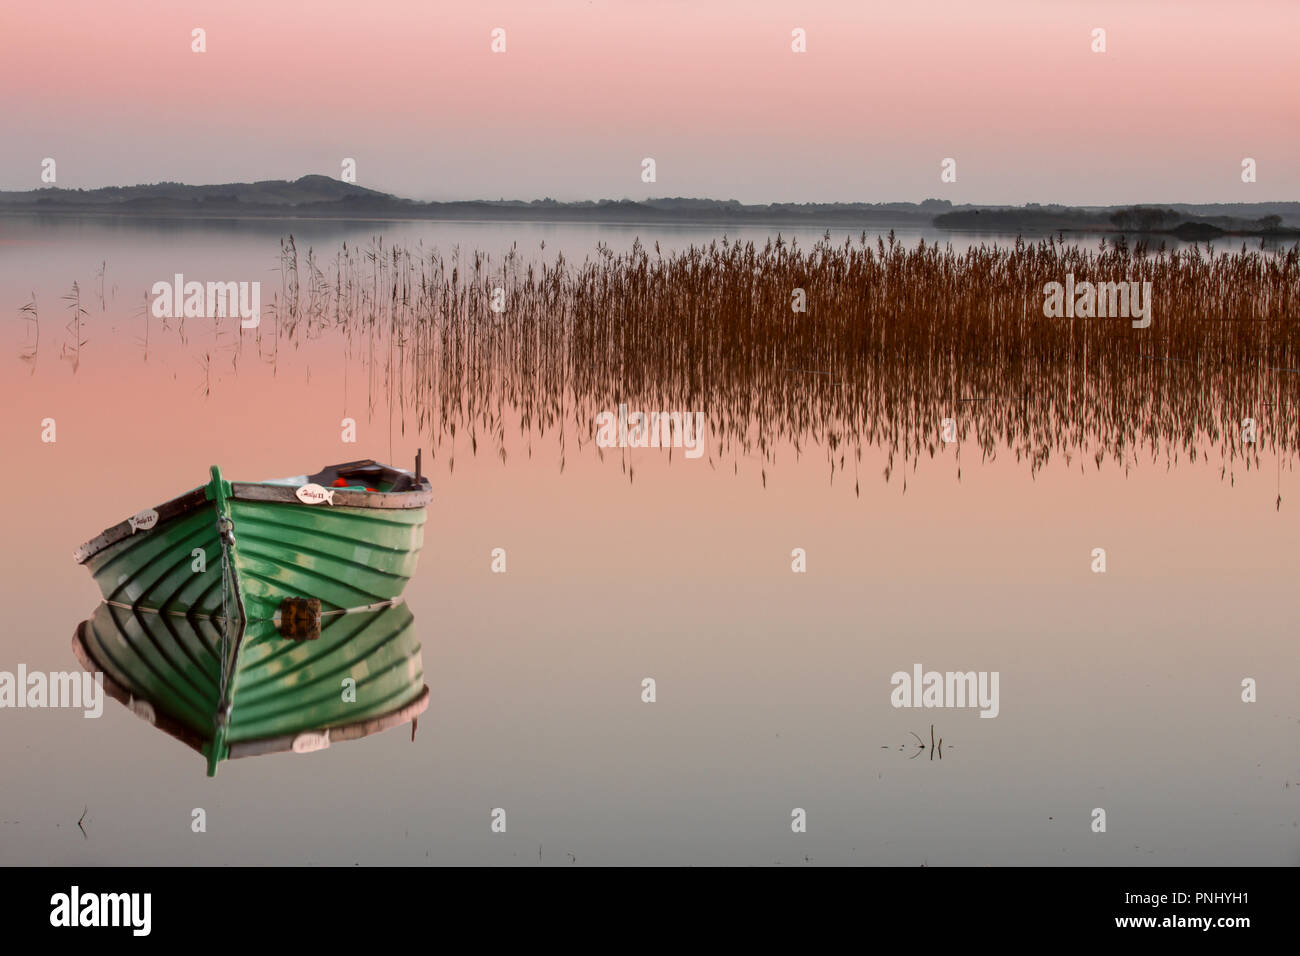 Cong, Mayo, Ireland. 06th December, 2008. Rowing boat and Reeds in Lough Cullen, Cong, Co. May, Ireland. Stock Photo